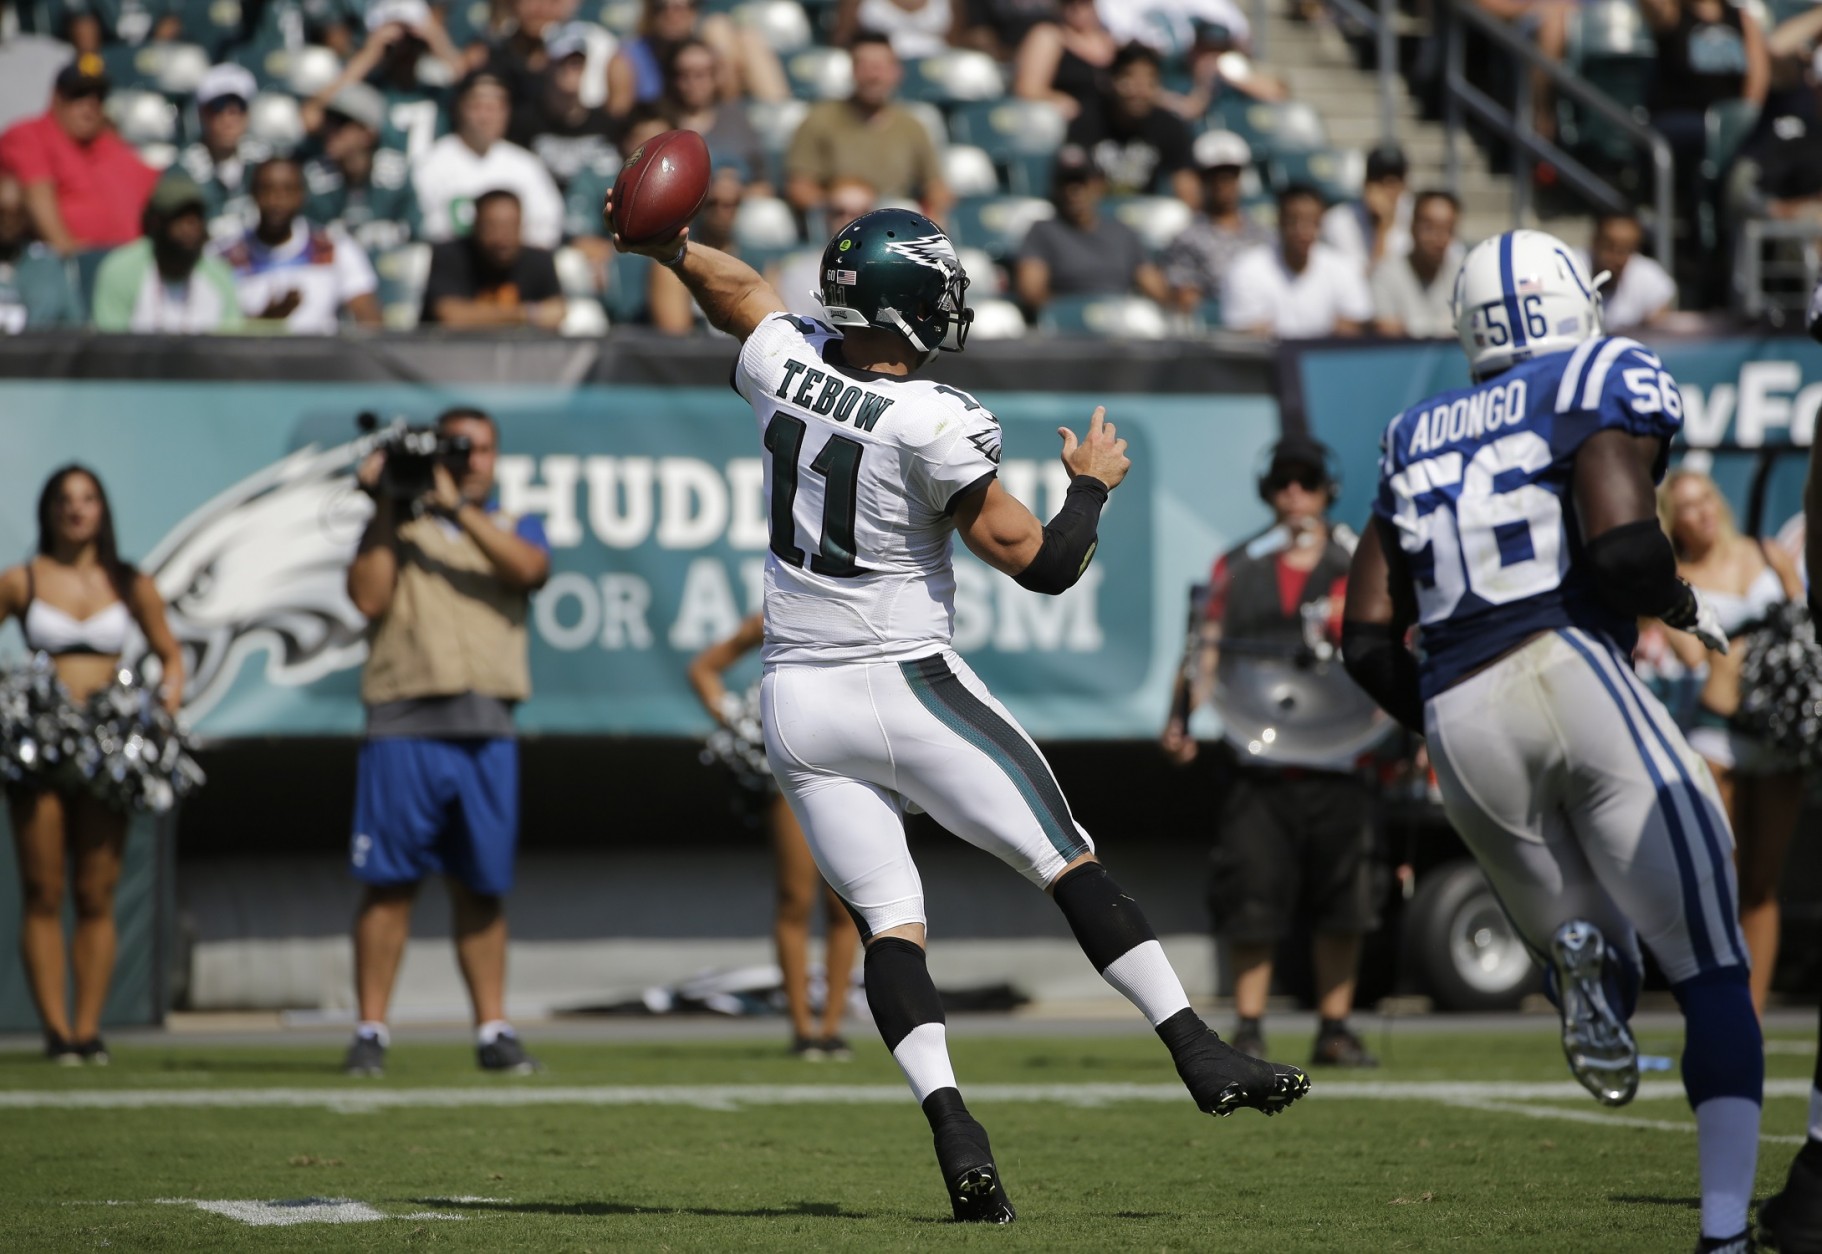 Philadelphia Eagles' Tim Tebow passes during the second half of a preseason NFL football game against the Indianapolis Colts, Sunday, Aug. 16, 2015, in Philadelphia. (AP Photo/Michael Perez)